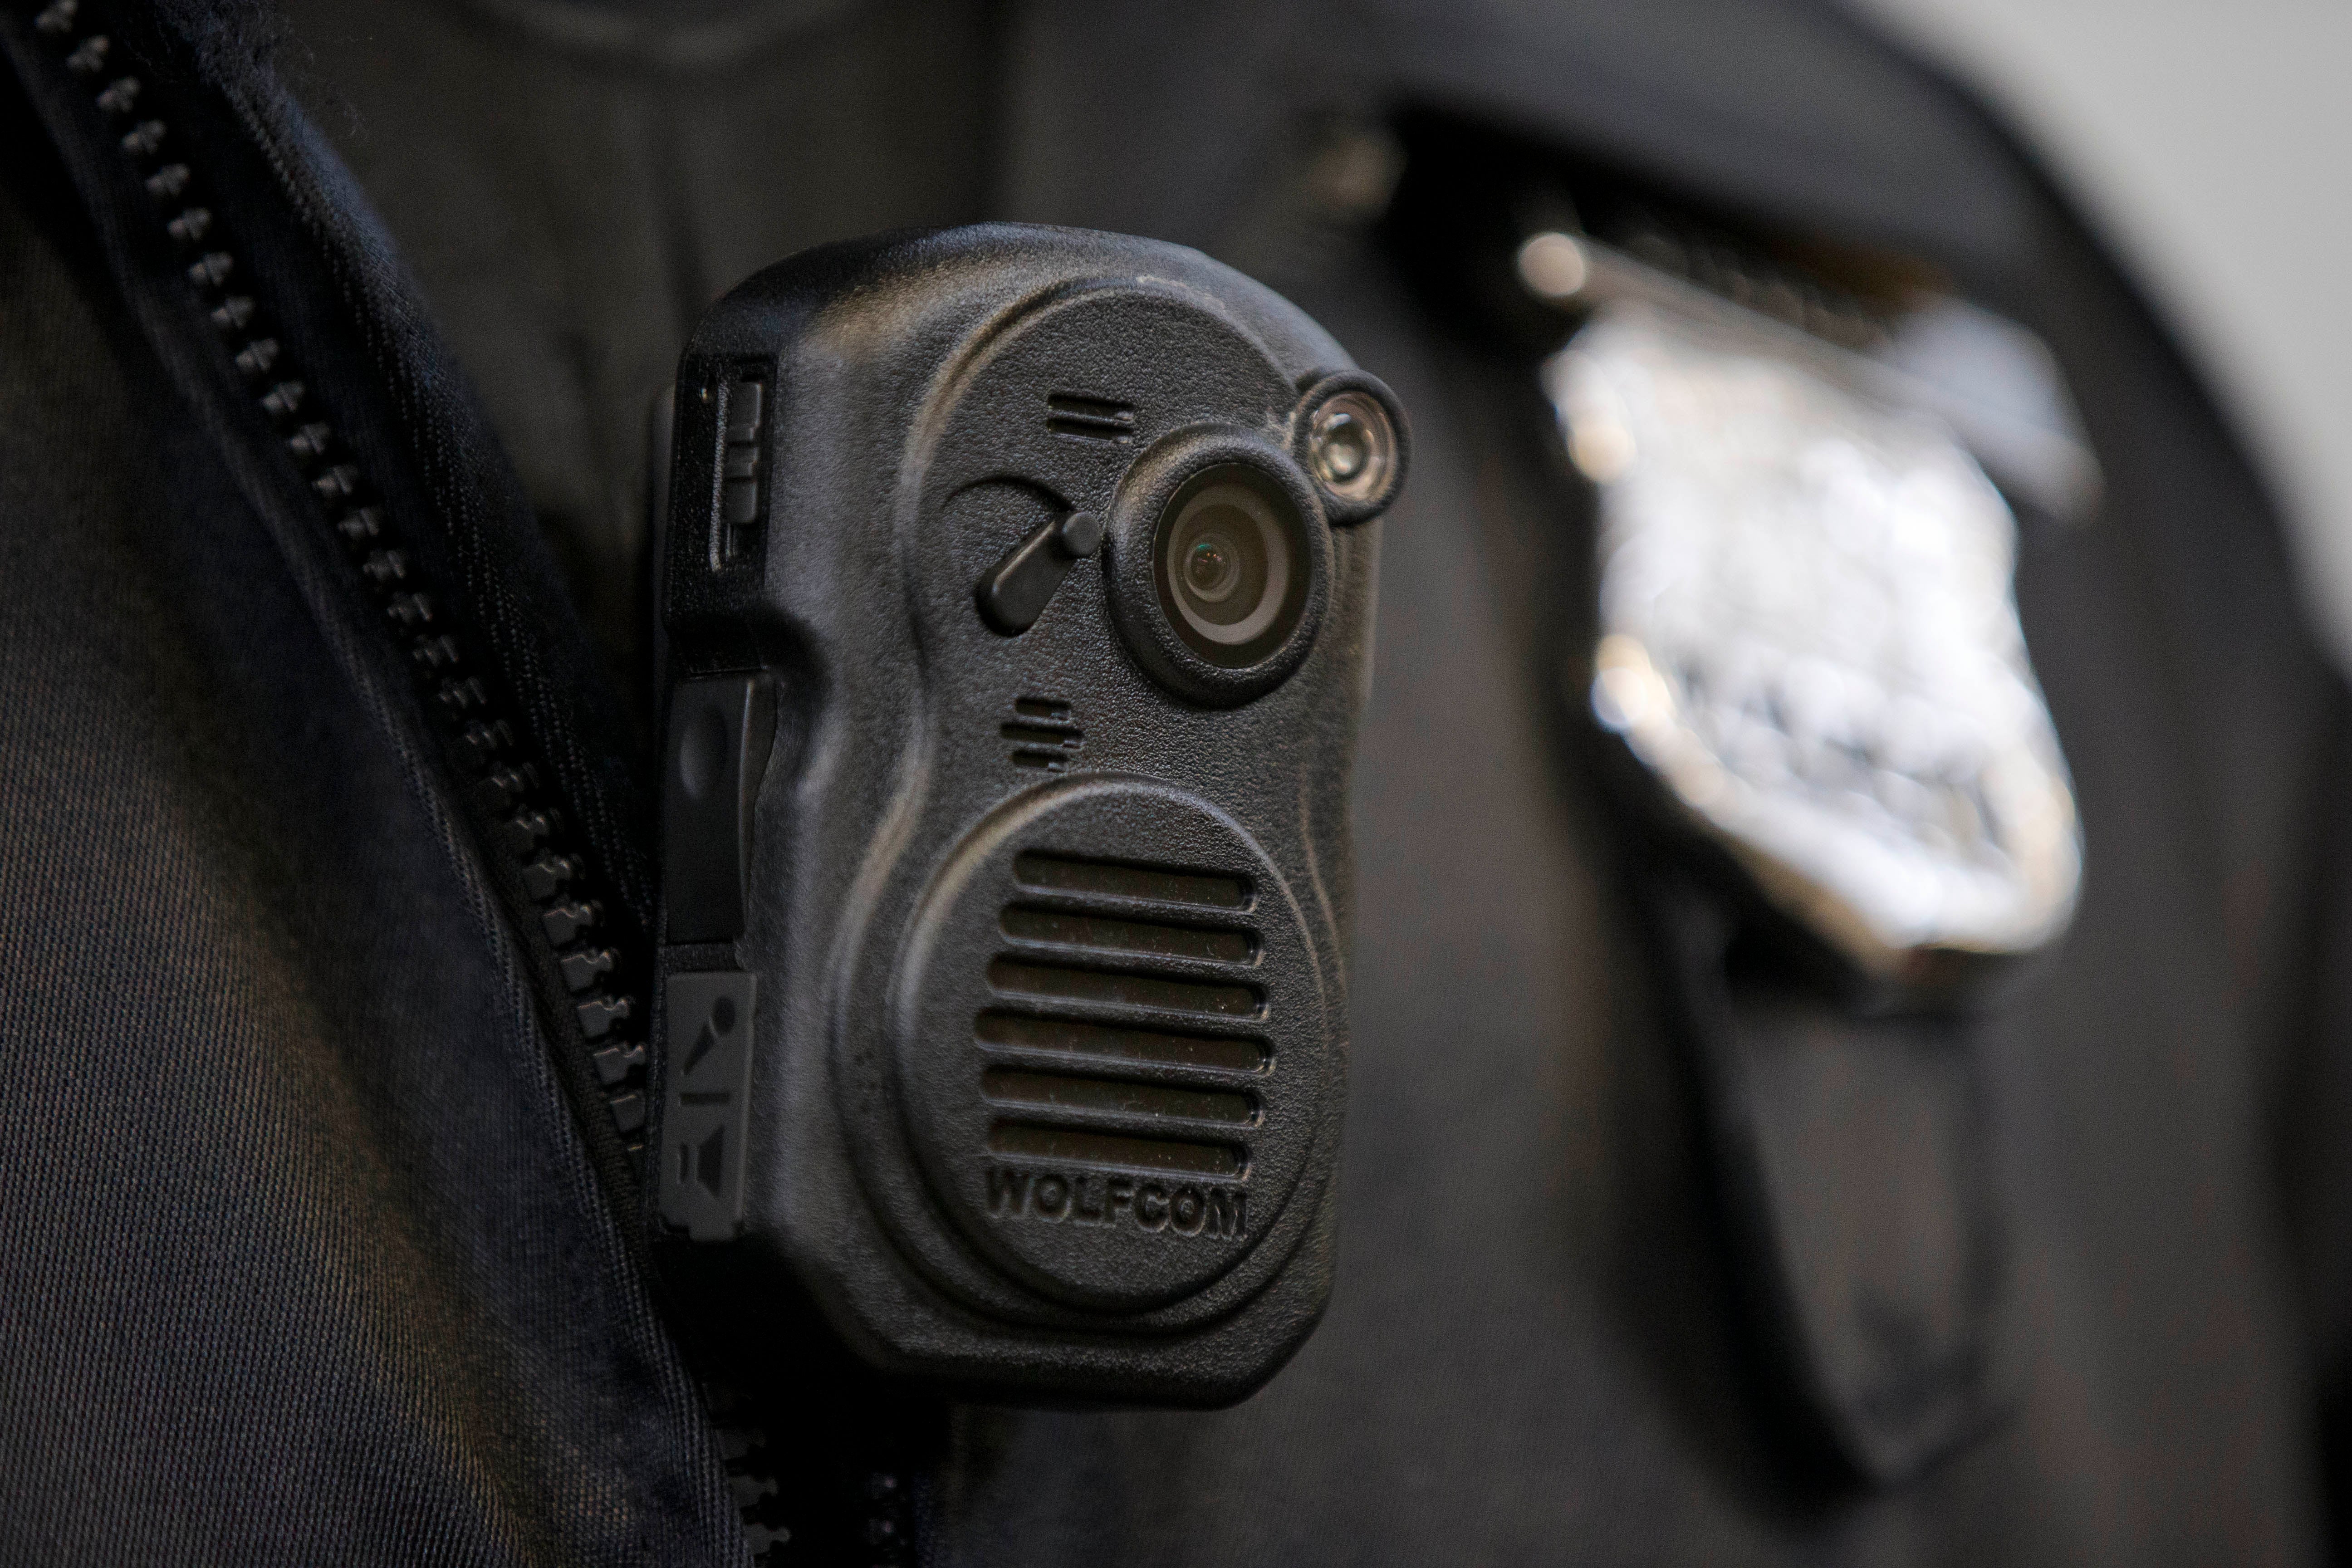 Body-worn video cameras for every prison officer to boost prison